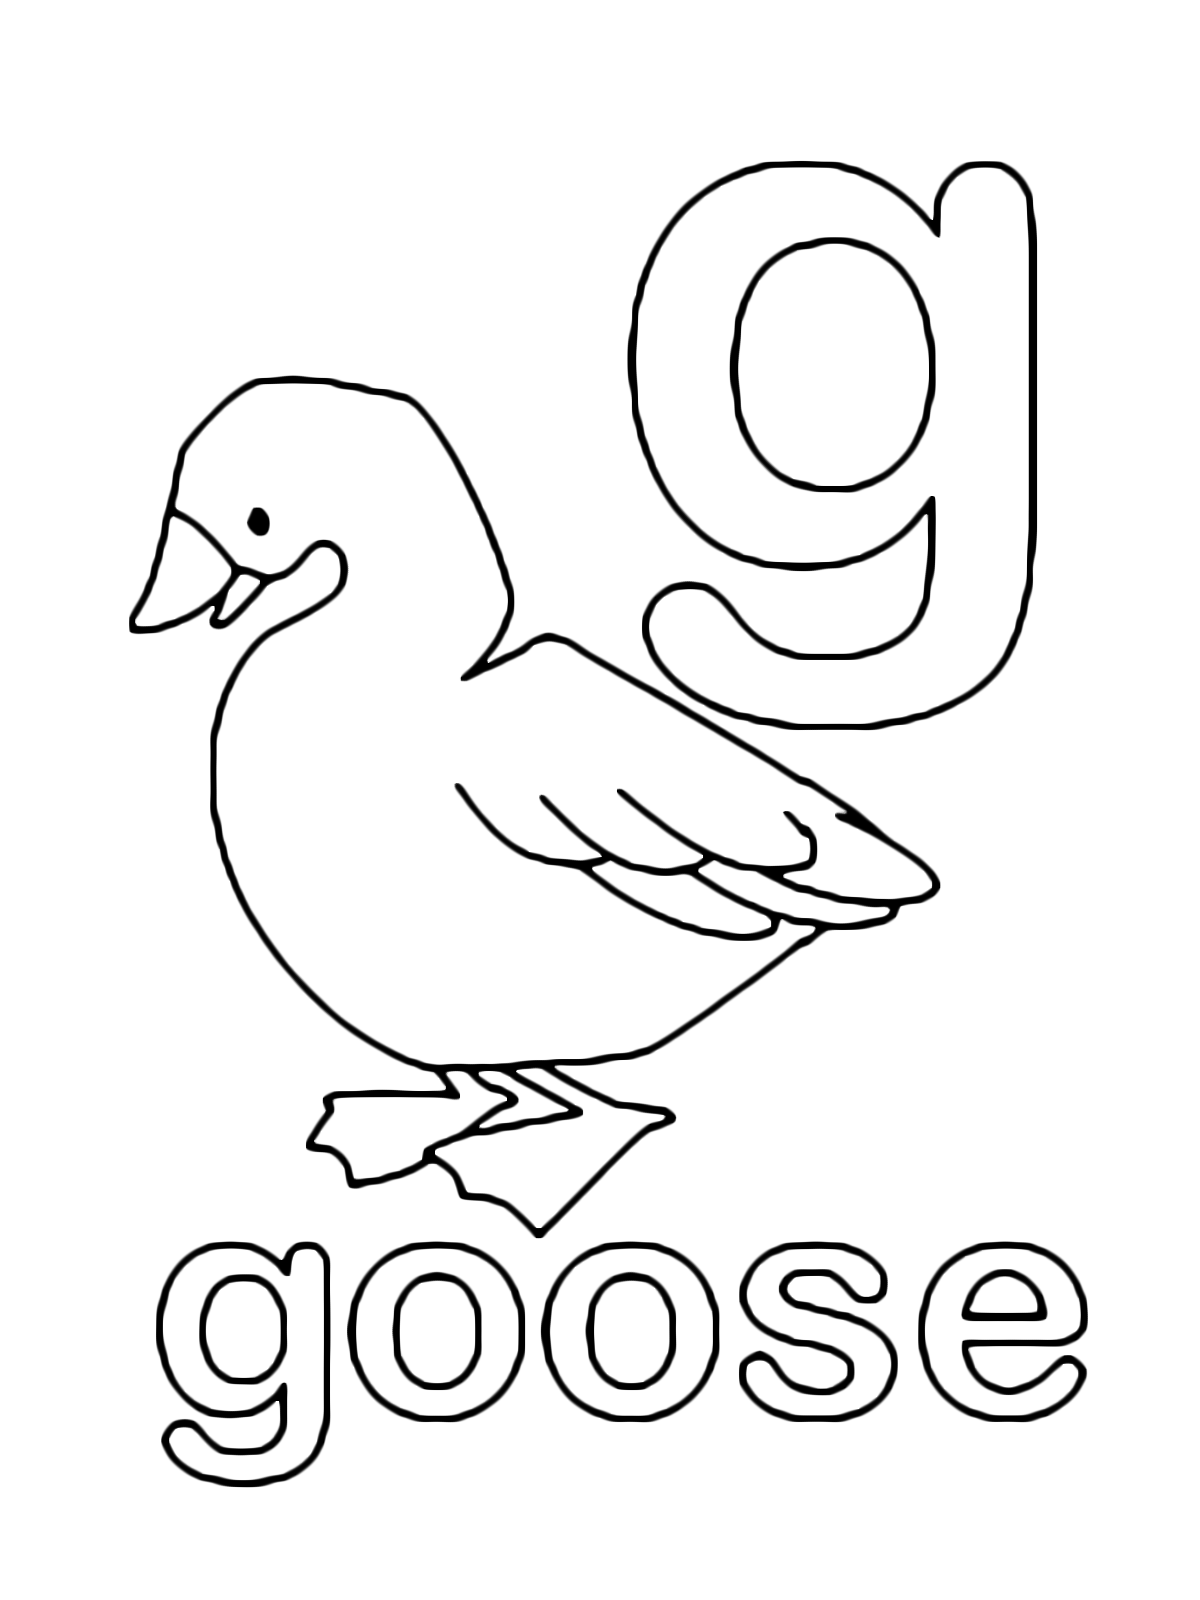 Letters and numbers - g for goose lowercase letter